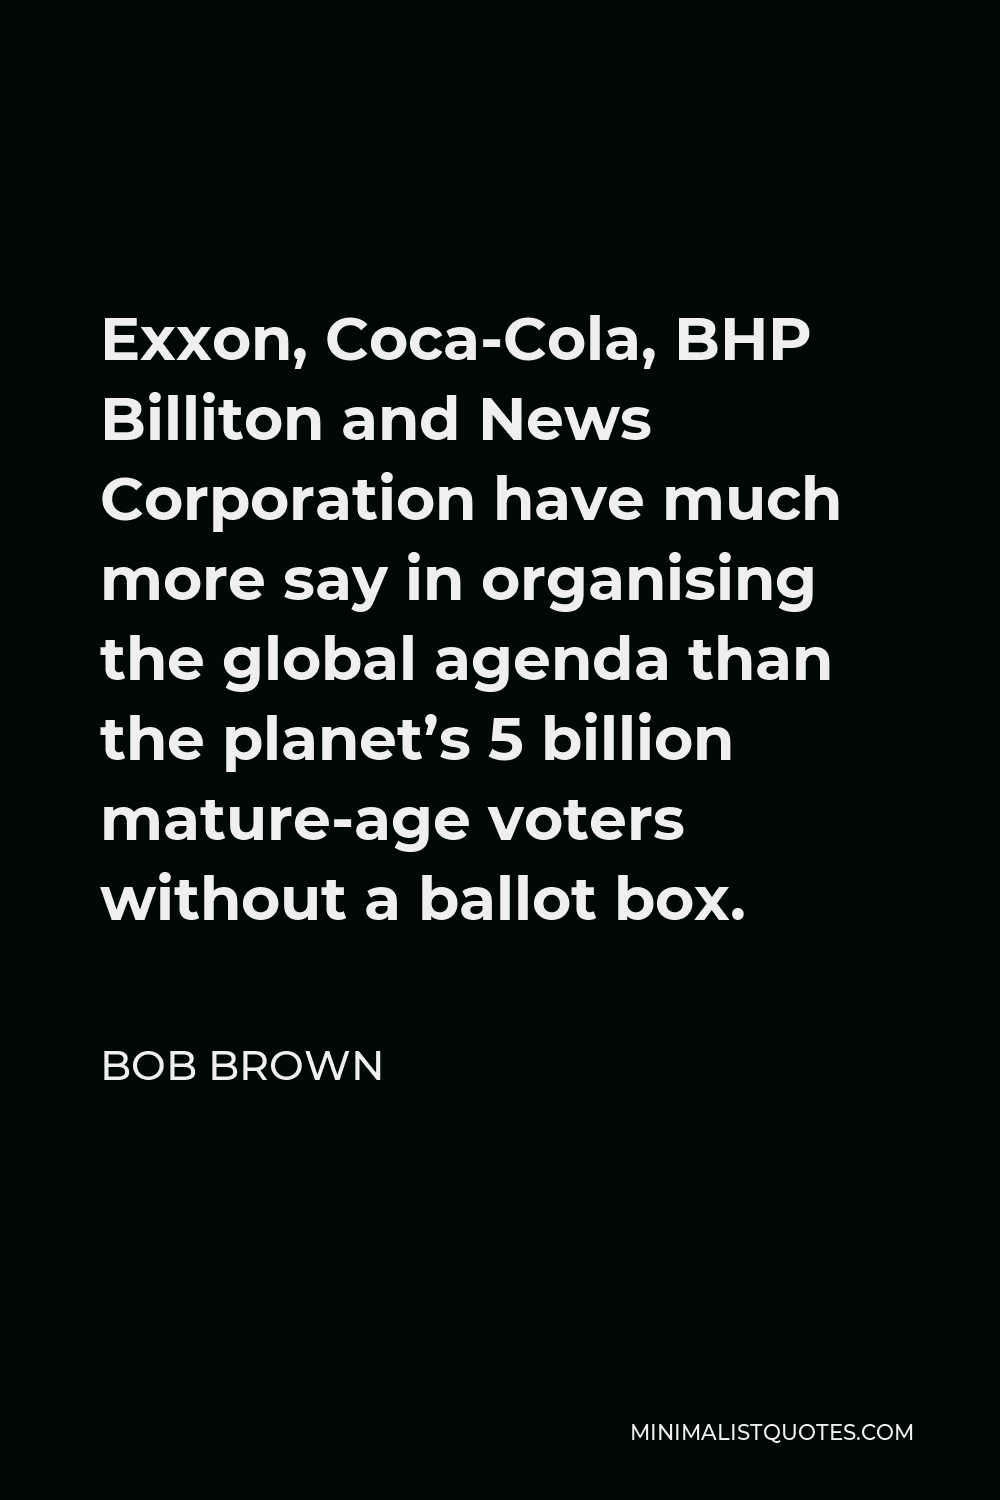 Bob Brown Quote - Exxon, Coca-Cola, BHP Billiton and News Corporation have much more say in organising the global agenda than the planet’s 5 billion mature-age voters without a ballot box.